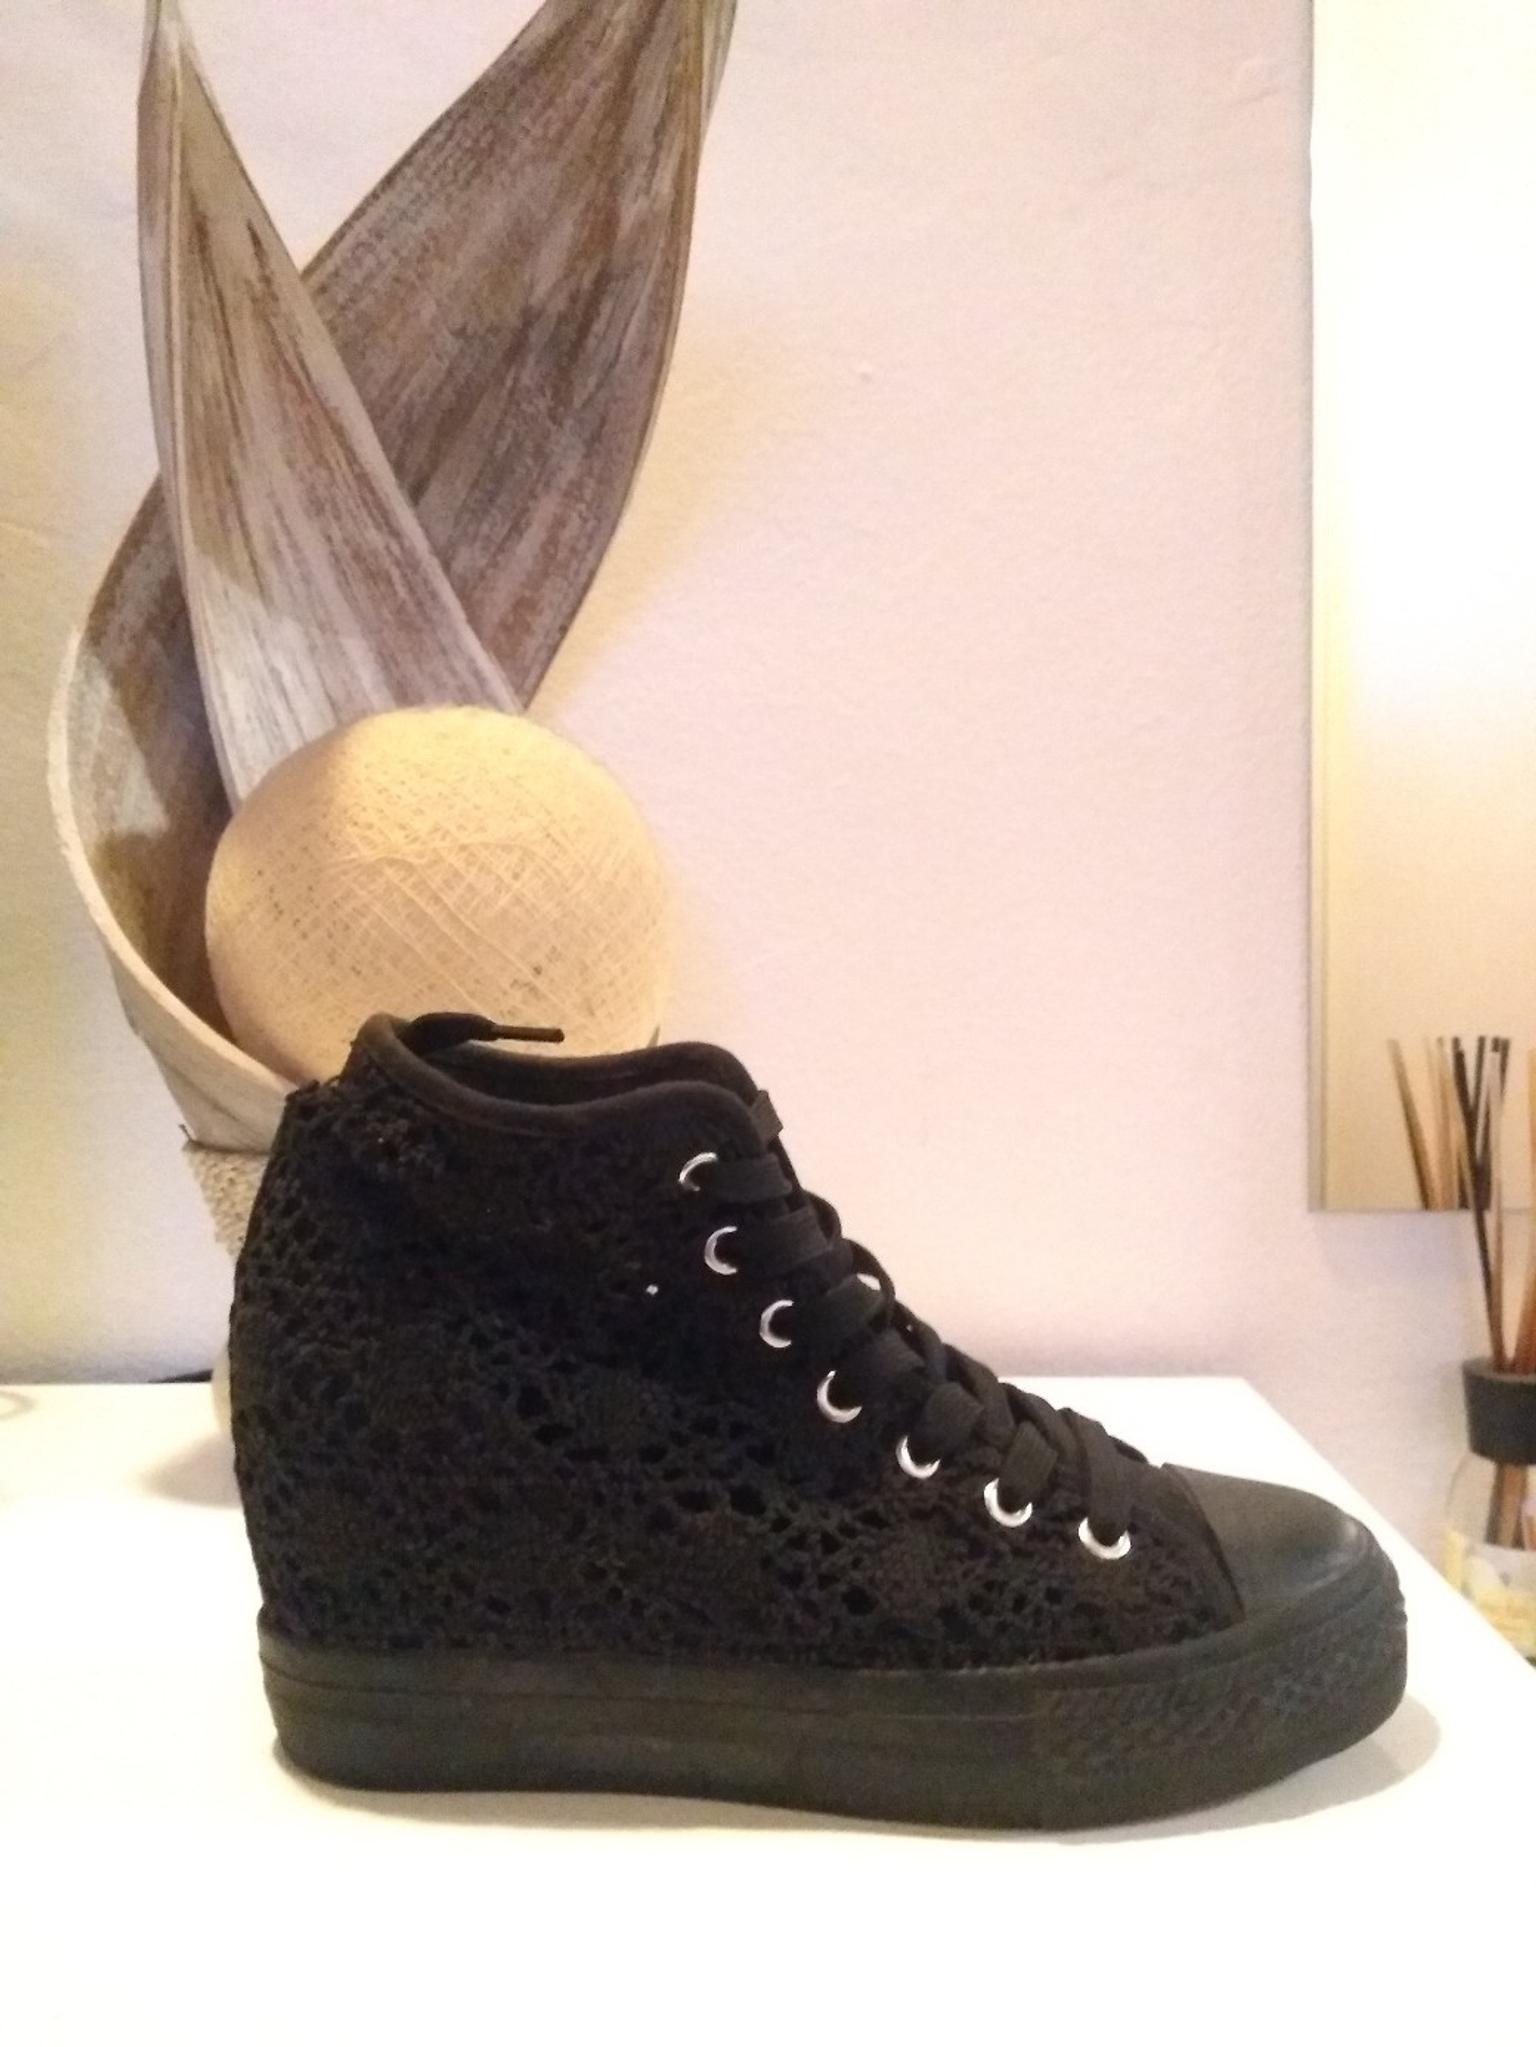 Sneakers tipo converse con zeppa nere in 20861 Brugherio for €15.00 for  sale | Shpock